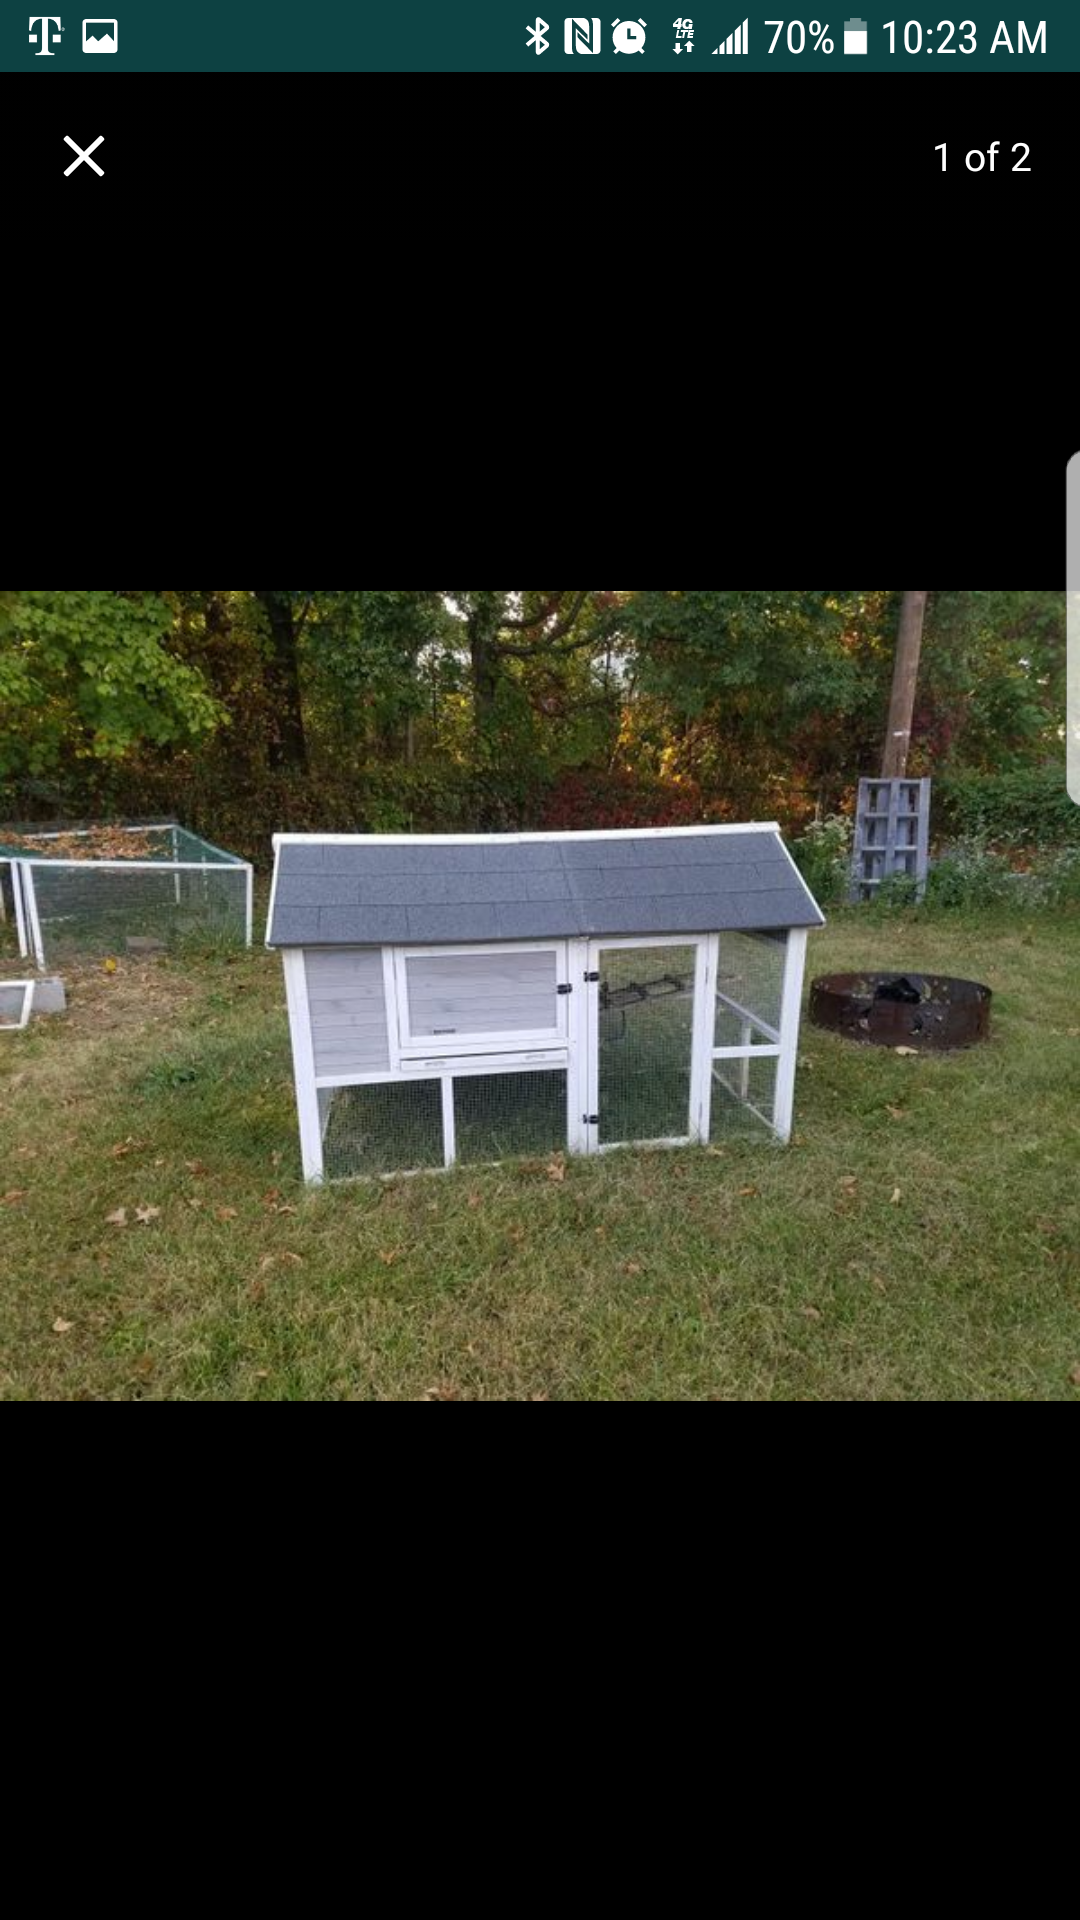 3ft x 5ft chicken coop holds up to 6 chickens